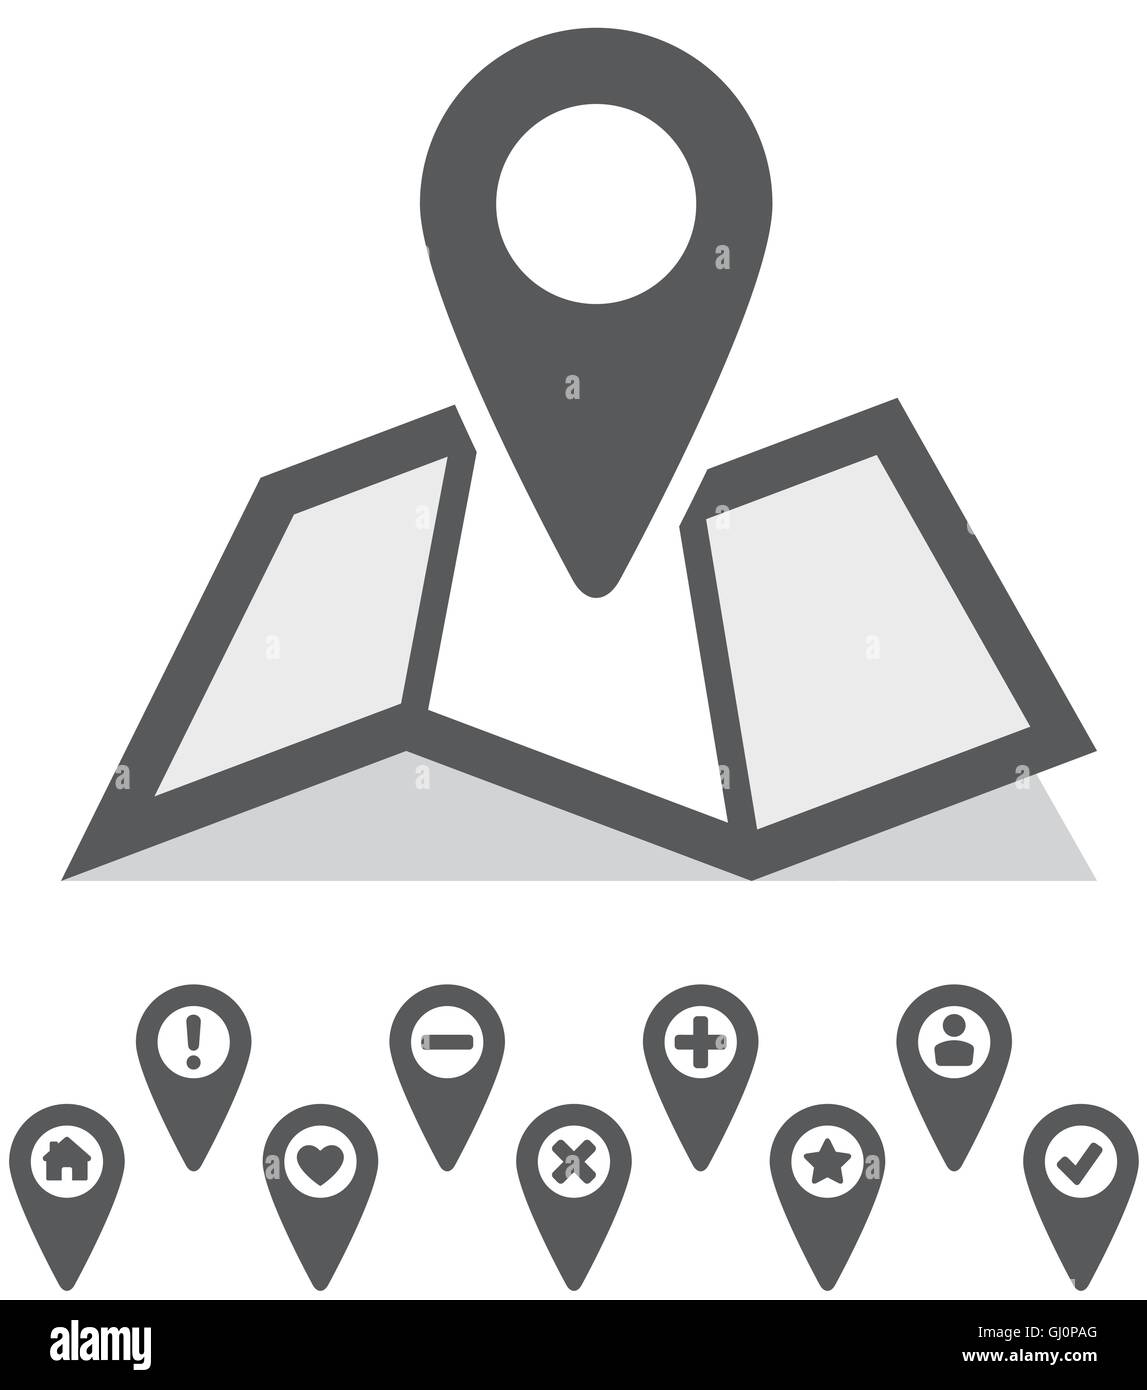 A nice folded map icon with marker on top, with more icon marker marker included. Stock Vector